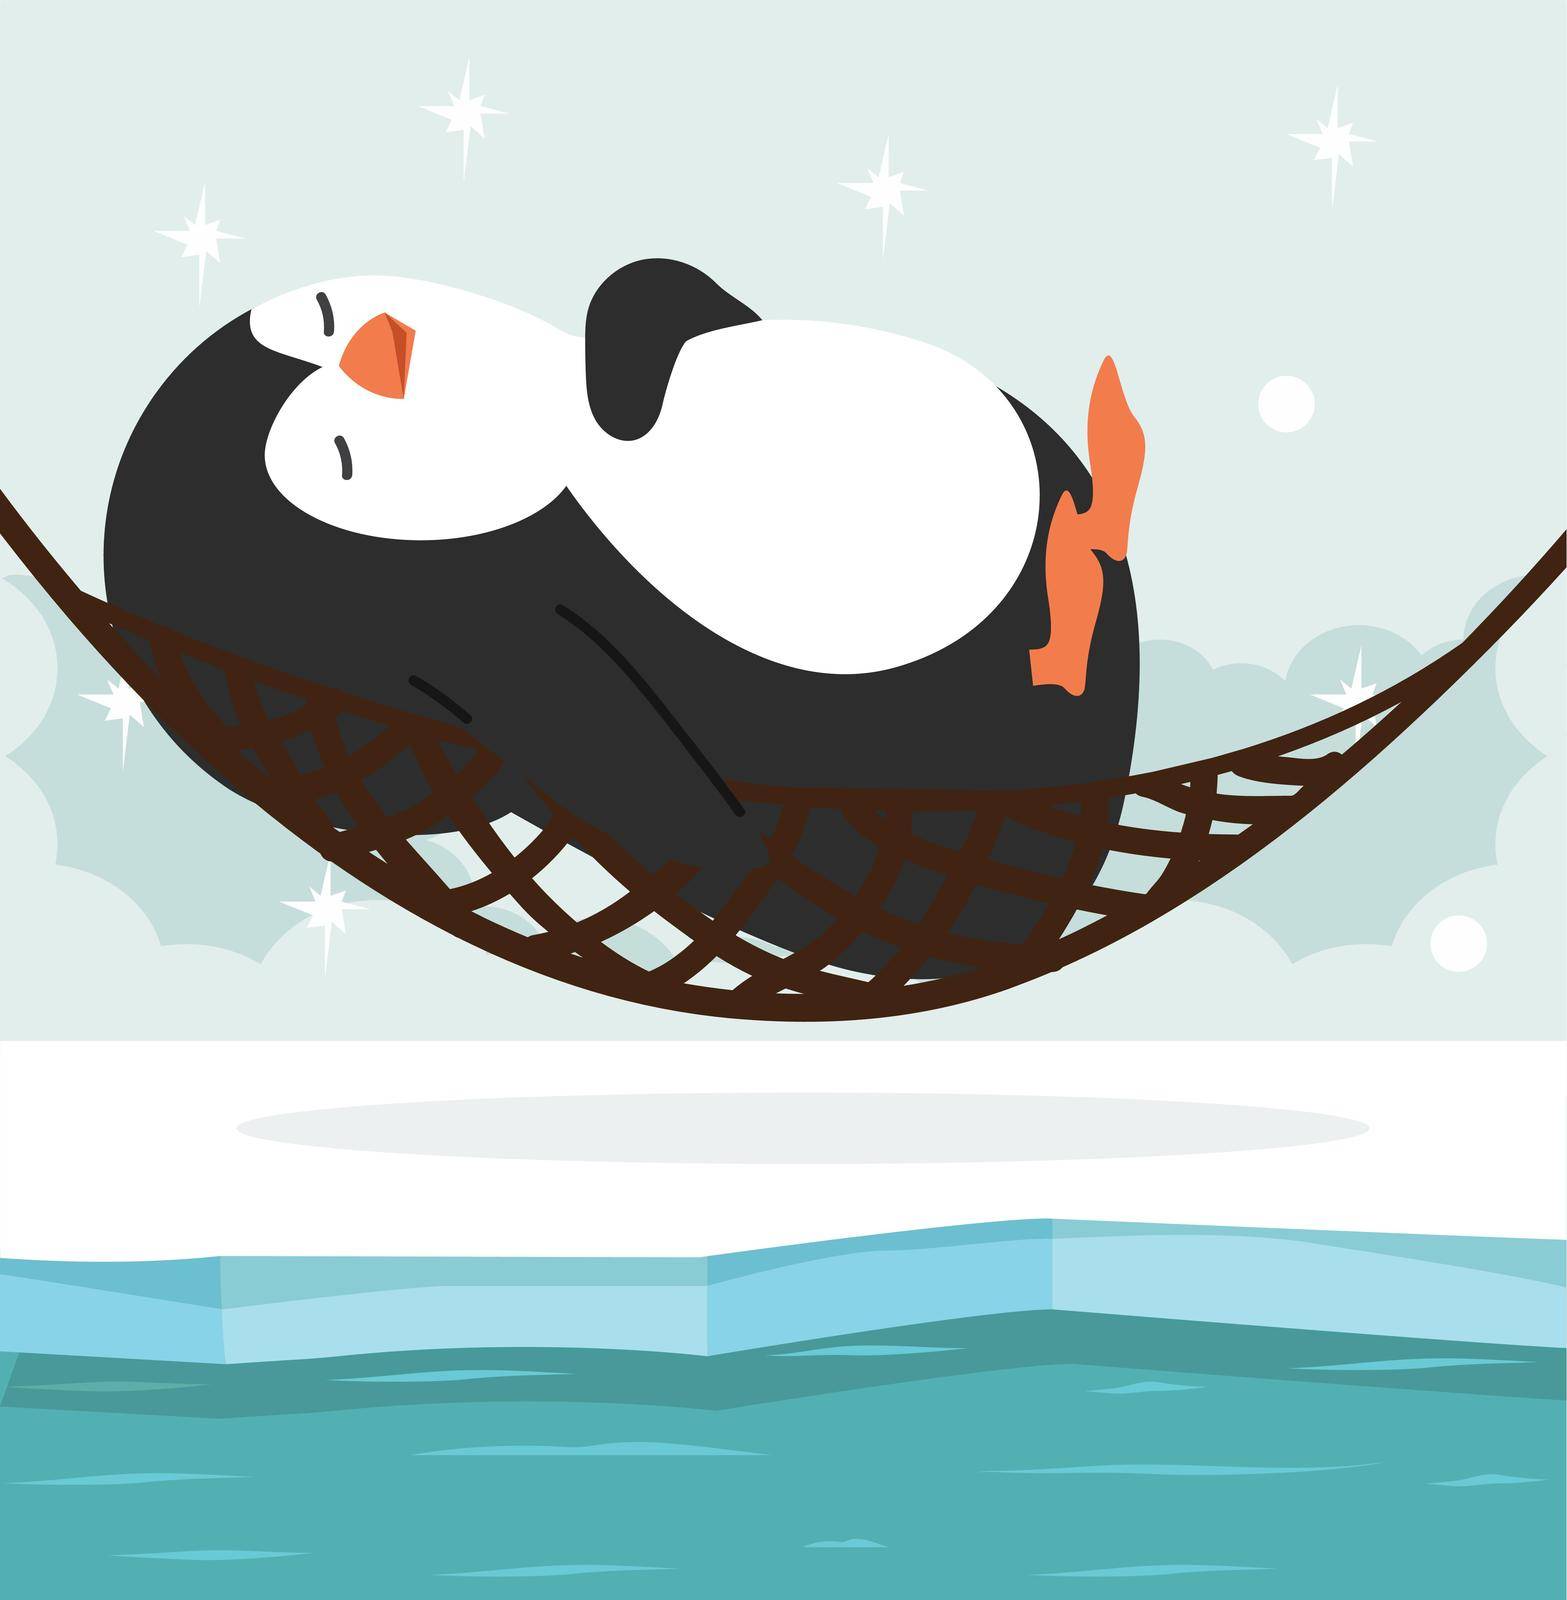 penguin sleep with hammock in North pole Arctic by focus_bell